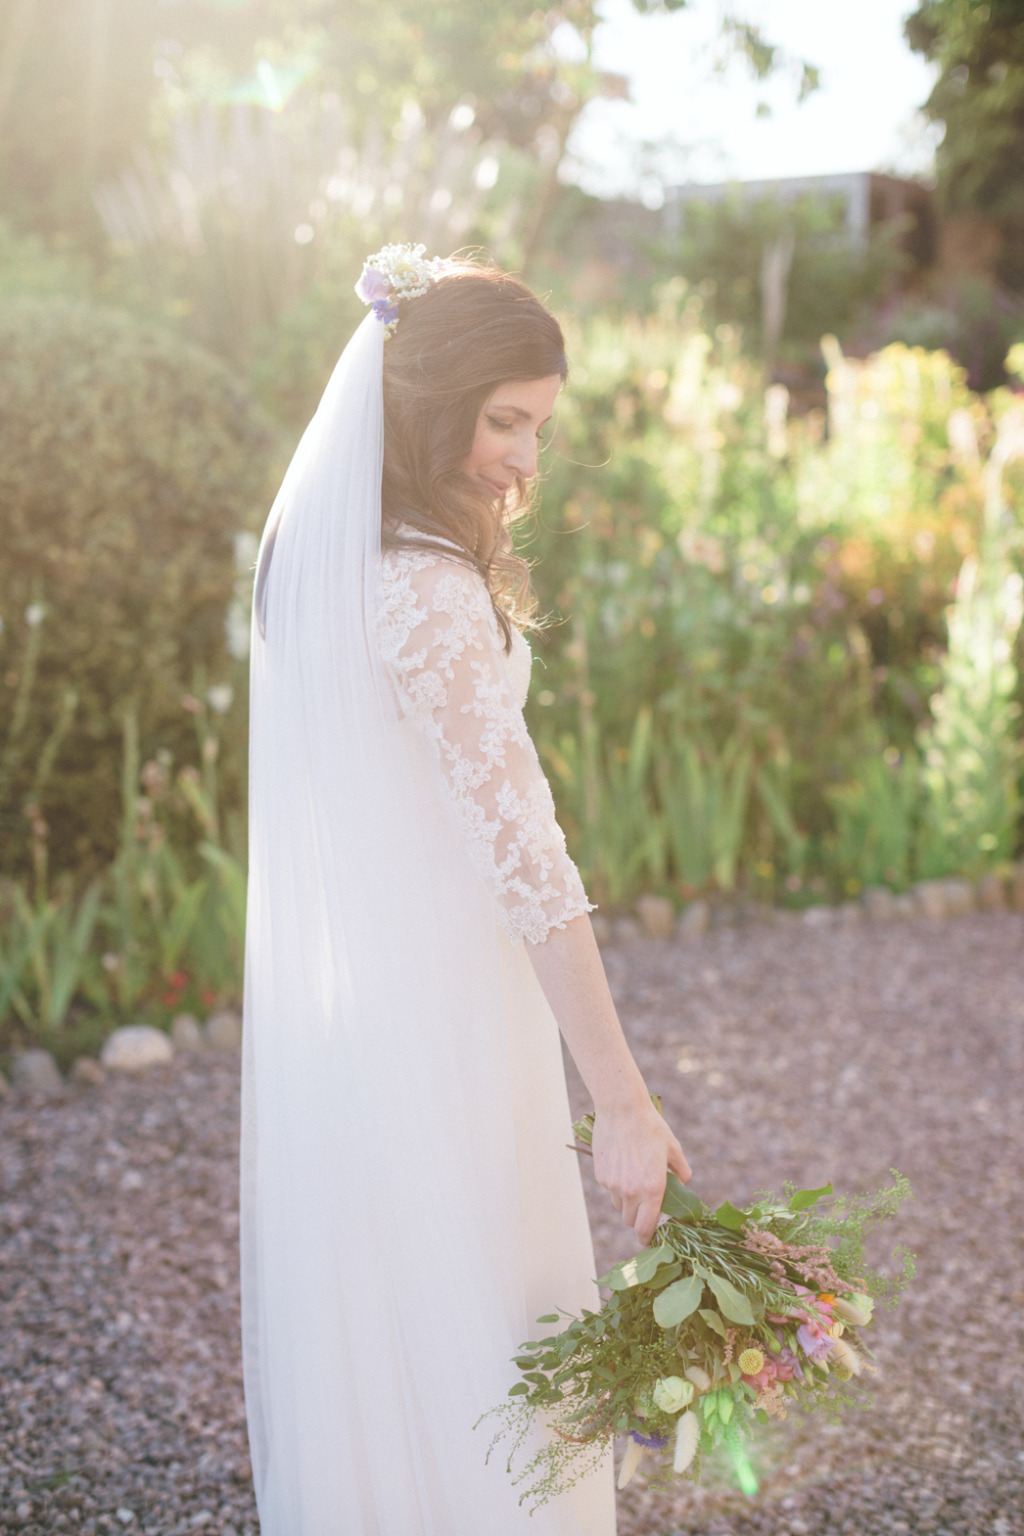 Bride wearing veil and bridal gown sunny summer shot bouquet of flowers